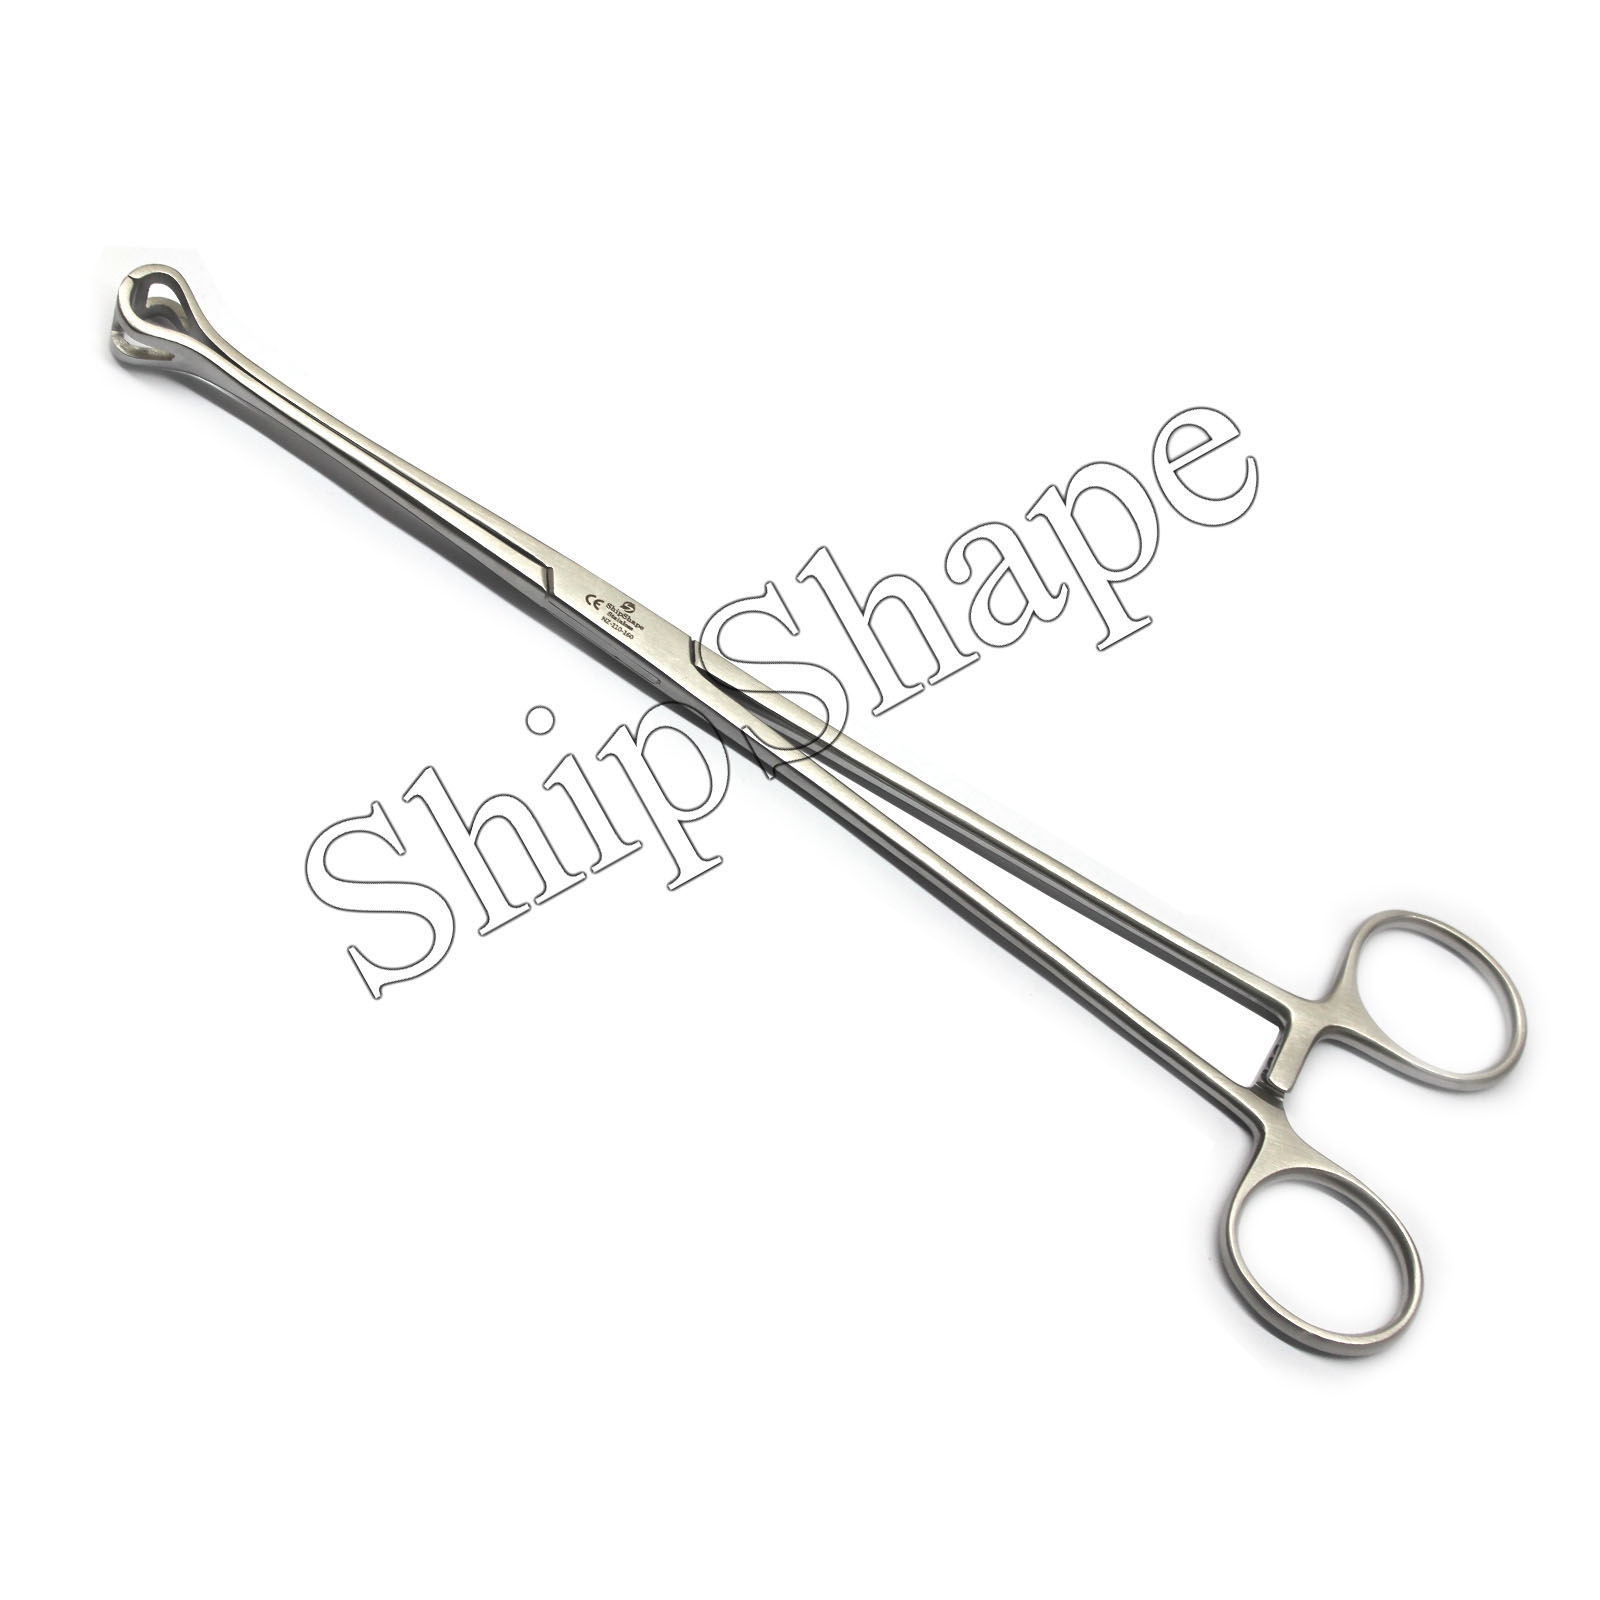 Babcock Forceps 10" Grasp Delicate Tissue Veterinary Surgical Instruments -277